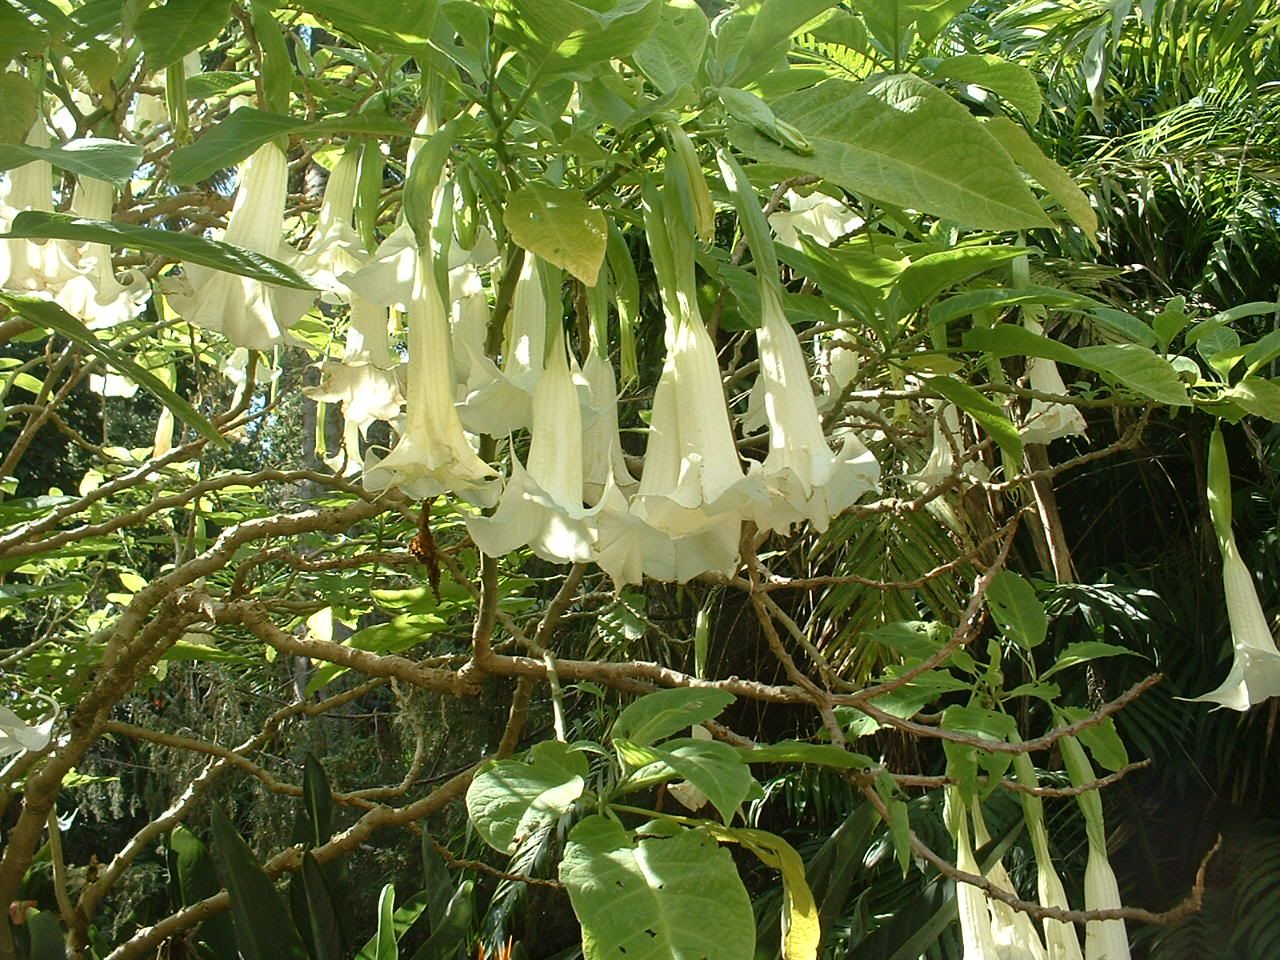 angels trumpet Pictures, Images and Photos